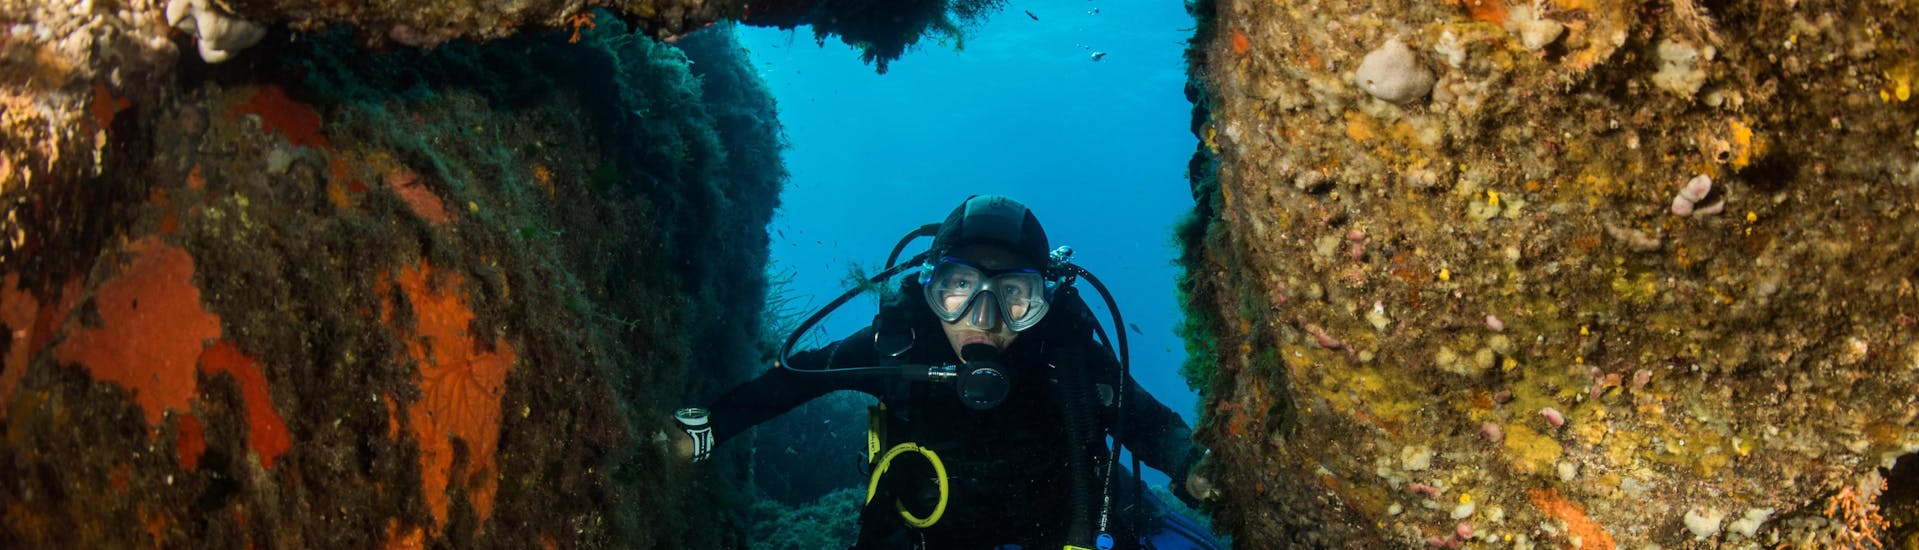 A diver is enjoying the seabed in Porto-Vecchio, Corsica during a diving excursion.